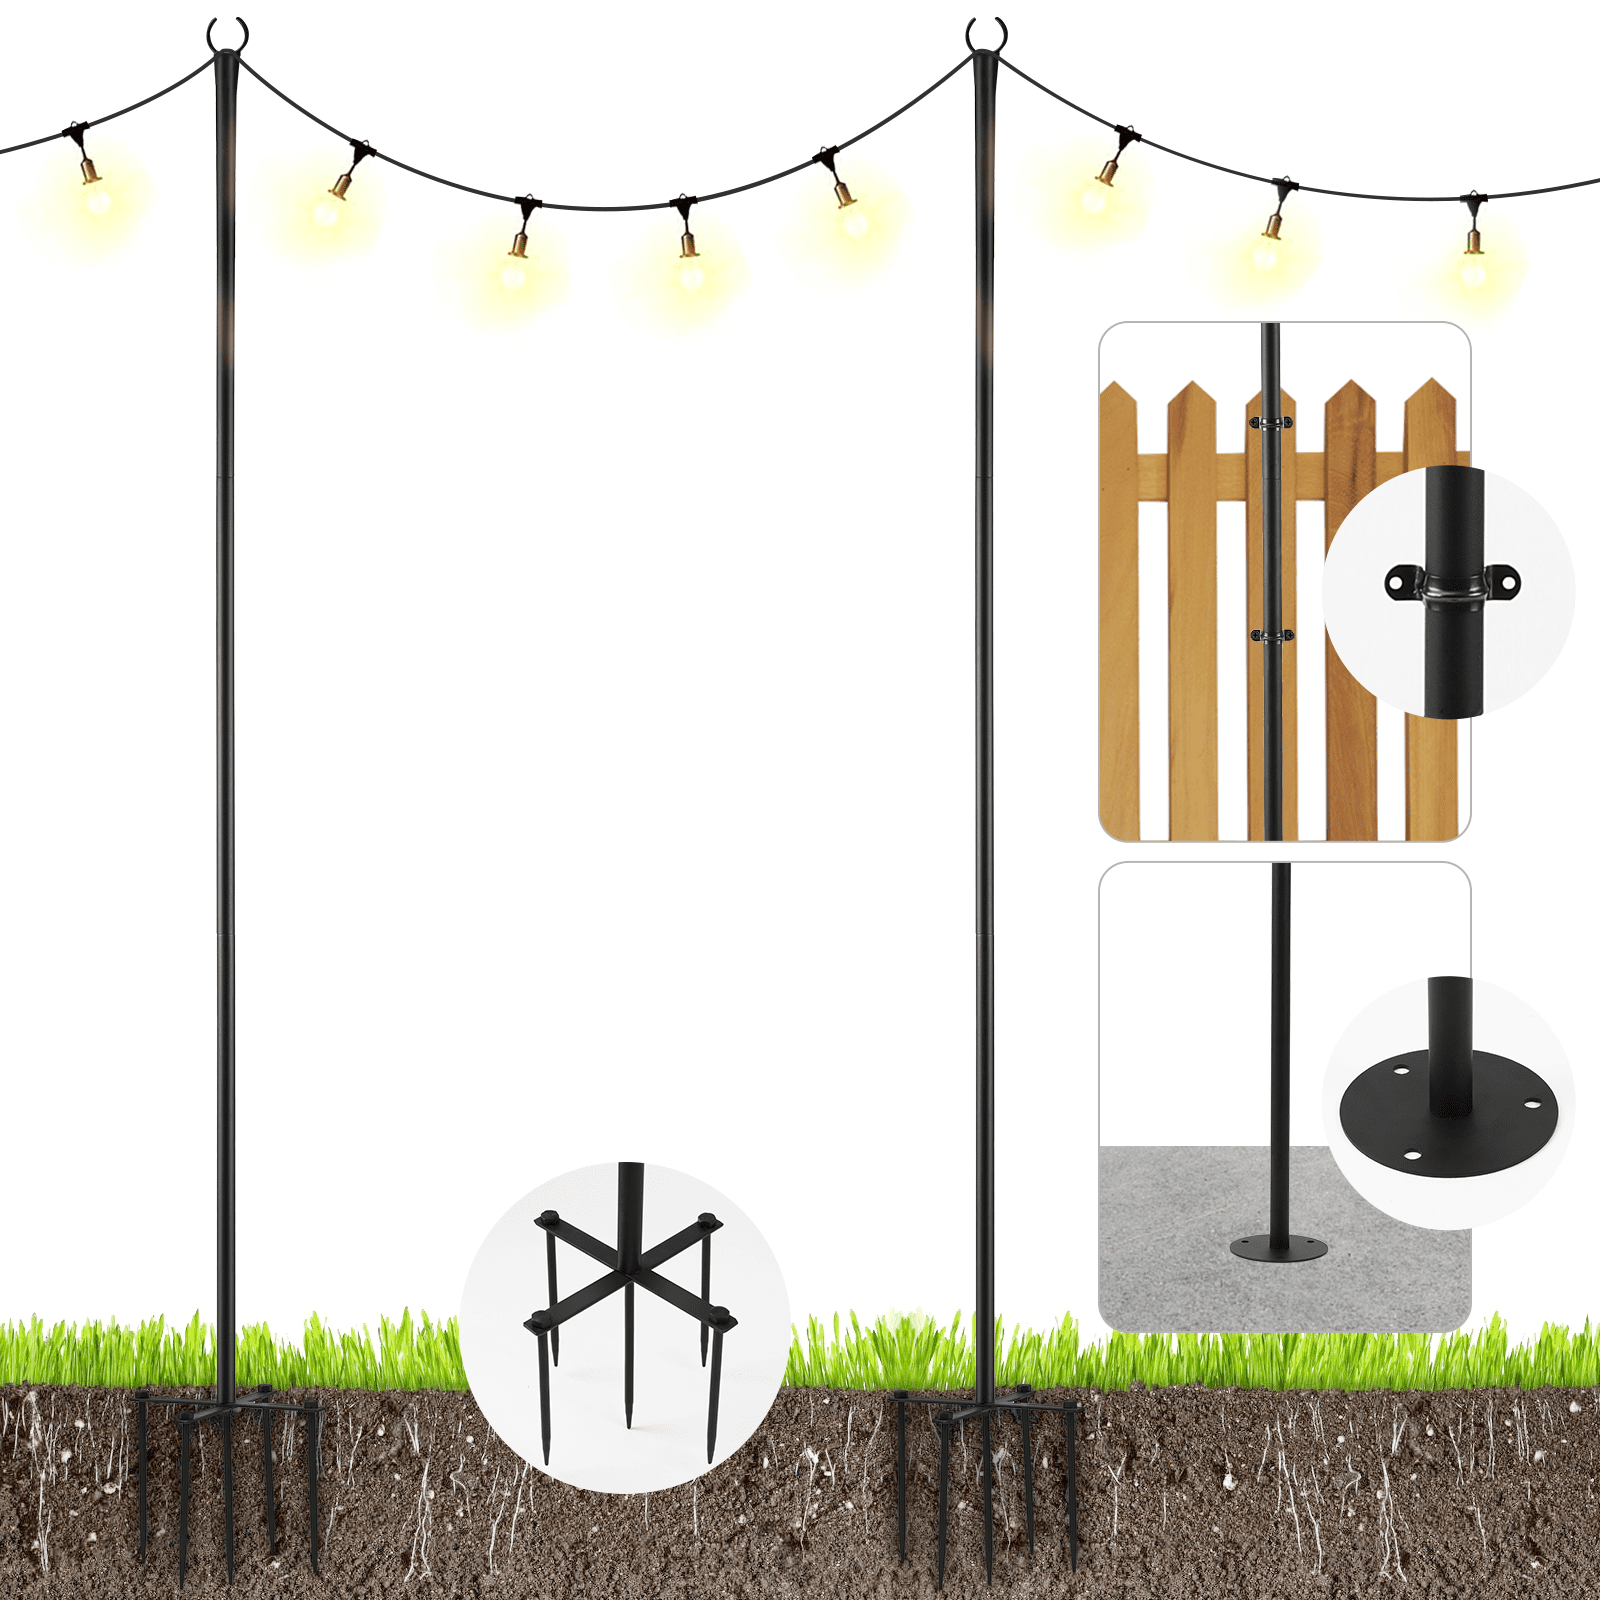 RichYa Outdoor String Light Poles 2 Pack, Extends to 8 ft, Three Installation Methods for Lawn Deck and Fence, for Hanging String Lights and Decor